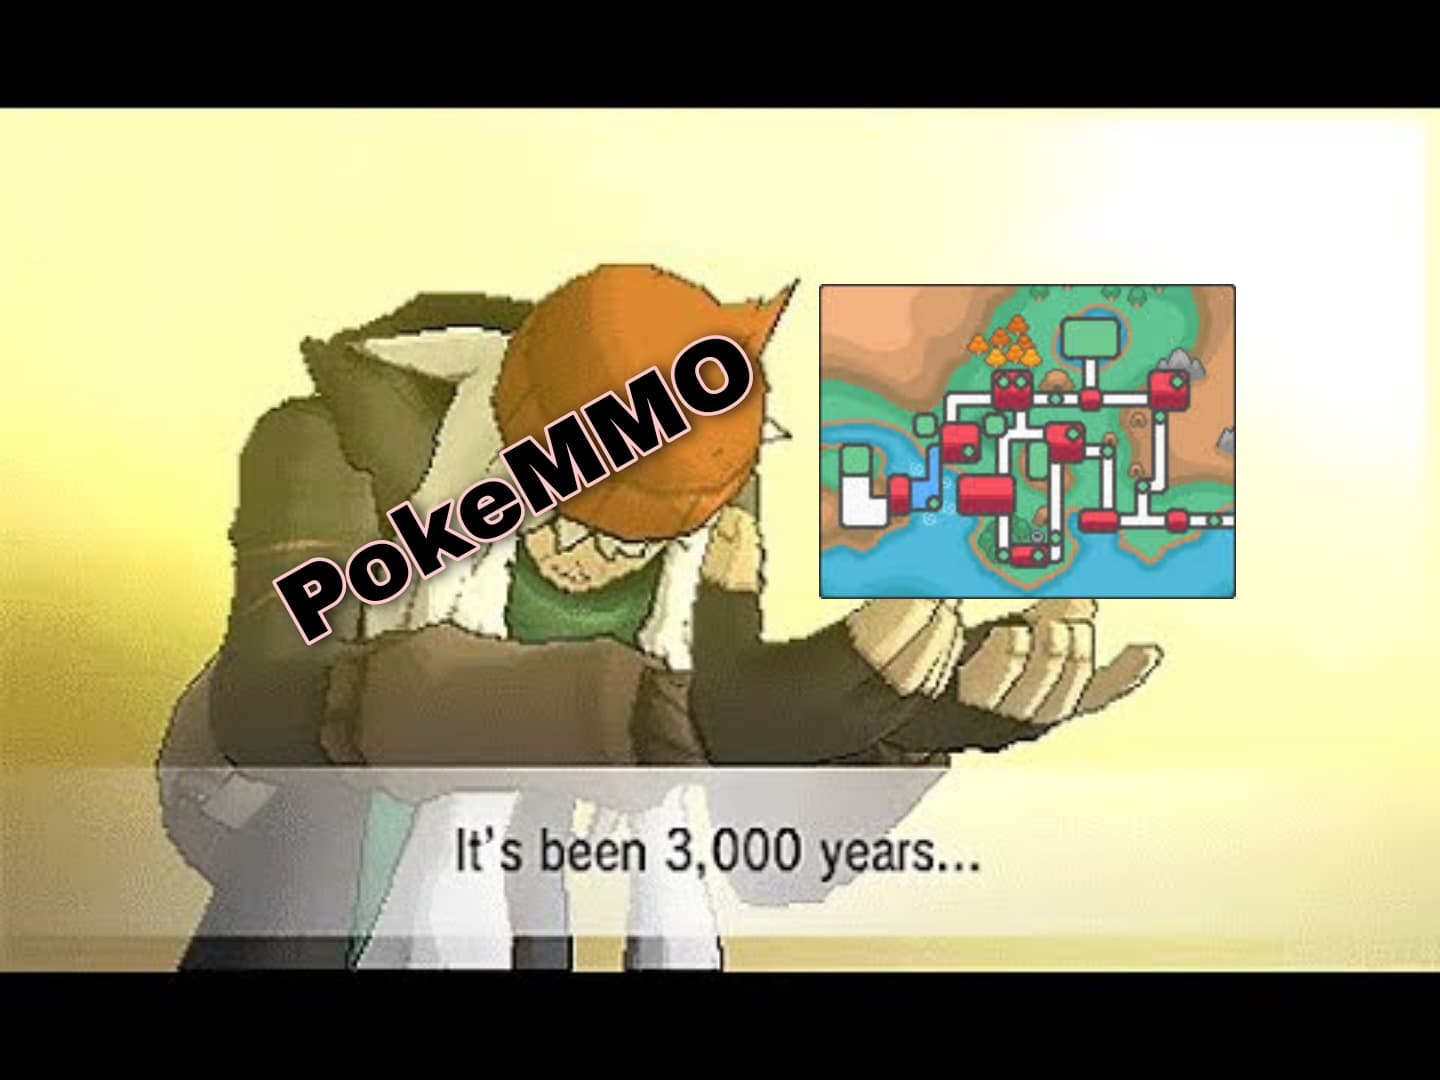 PokeMMO is the game every Pokemon fan could have ever wanted. But this